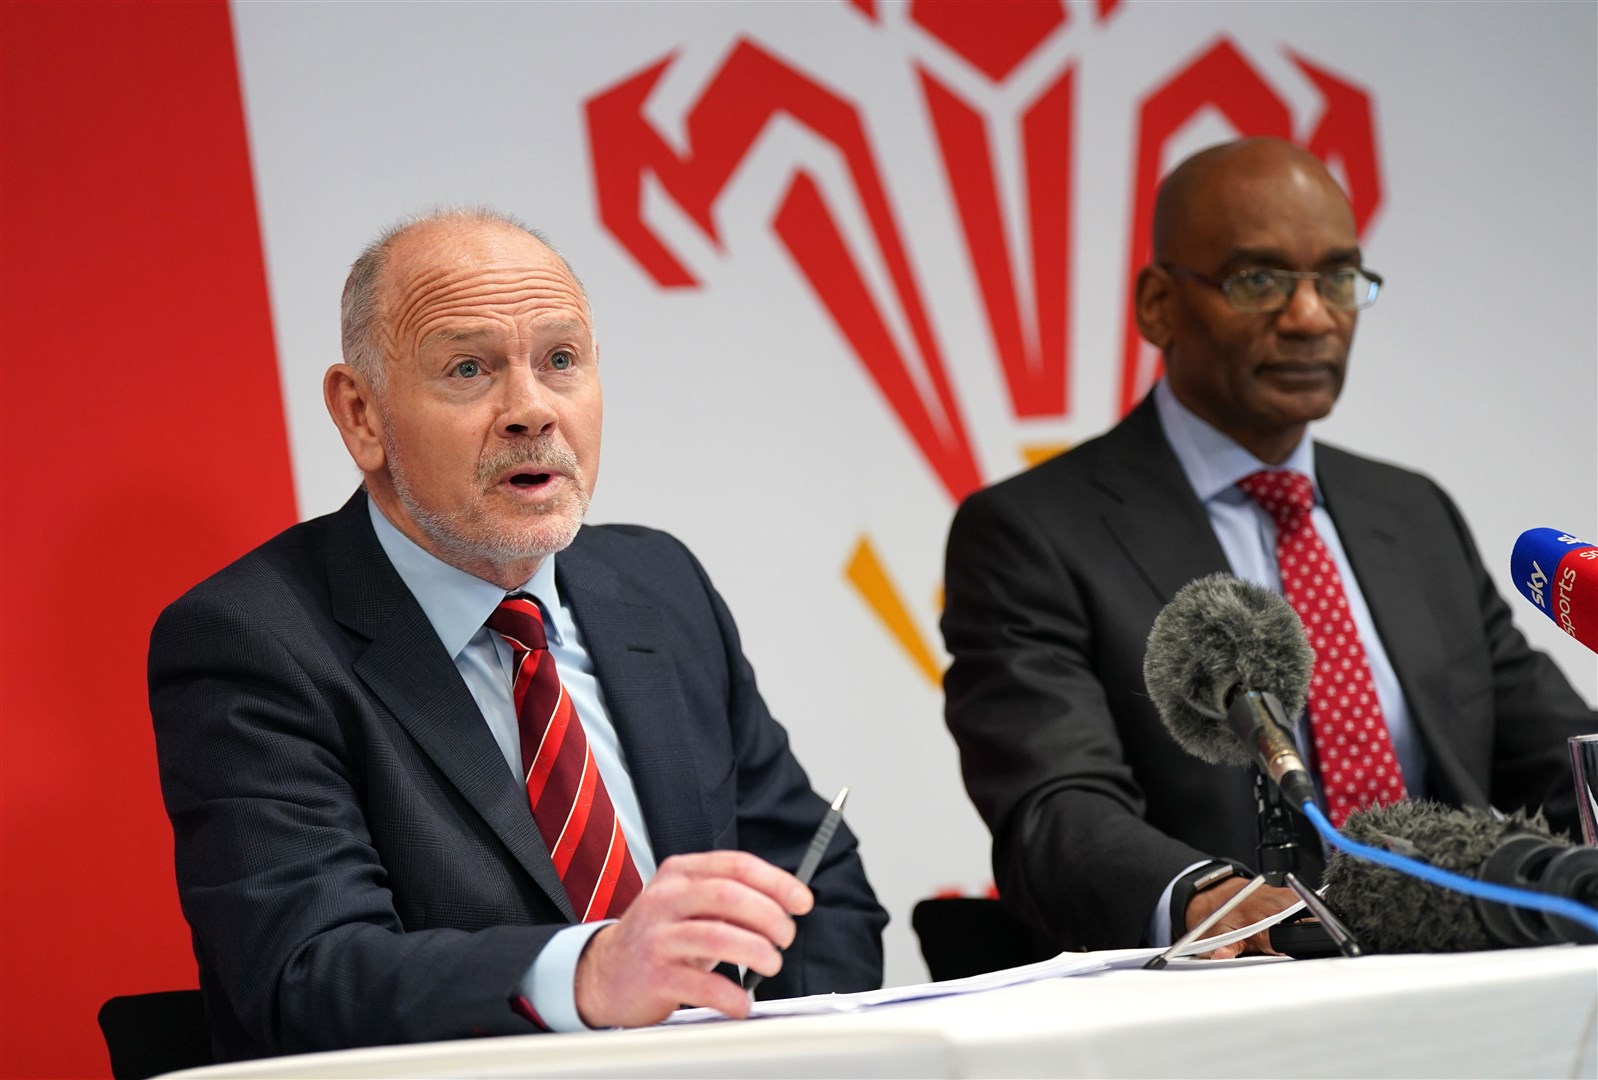 WRU chairman Ieuan Evans, left, and acting chief executive Nigel Walker, were called before the Senedd committee for its first hearing into the allegations (Jacob King/PA)